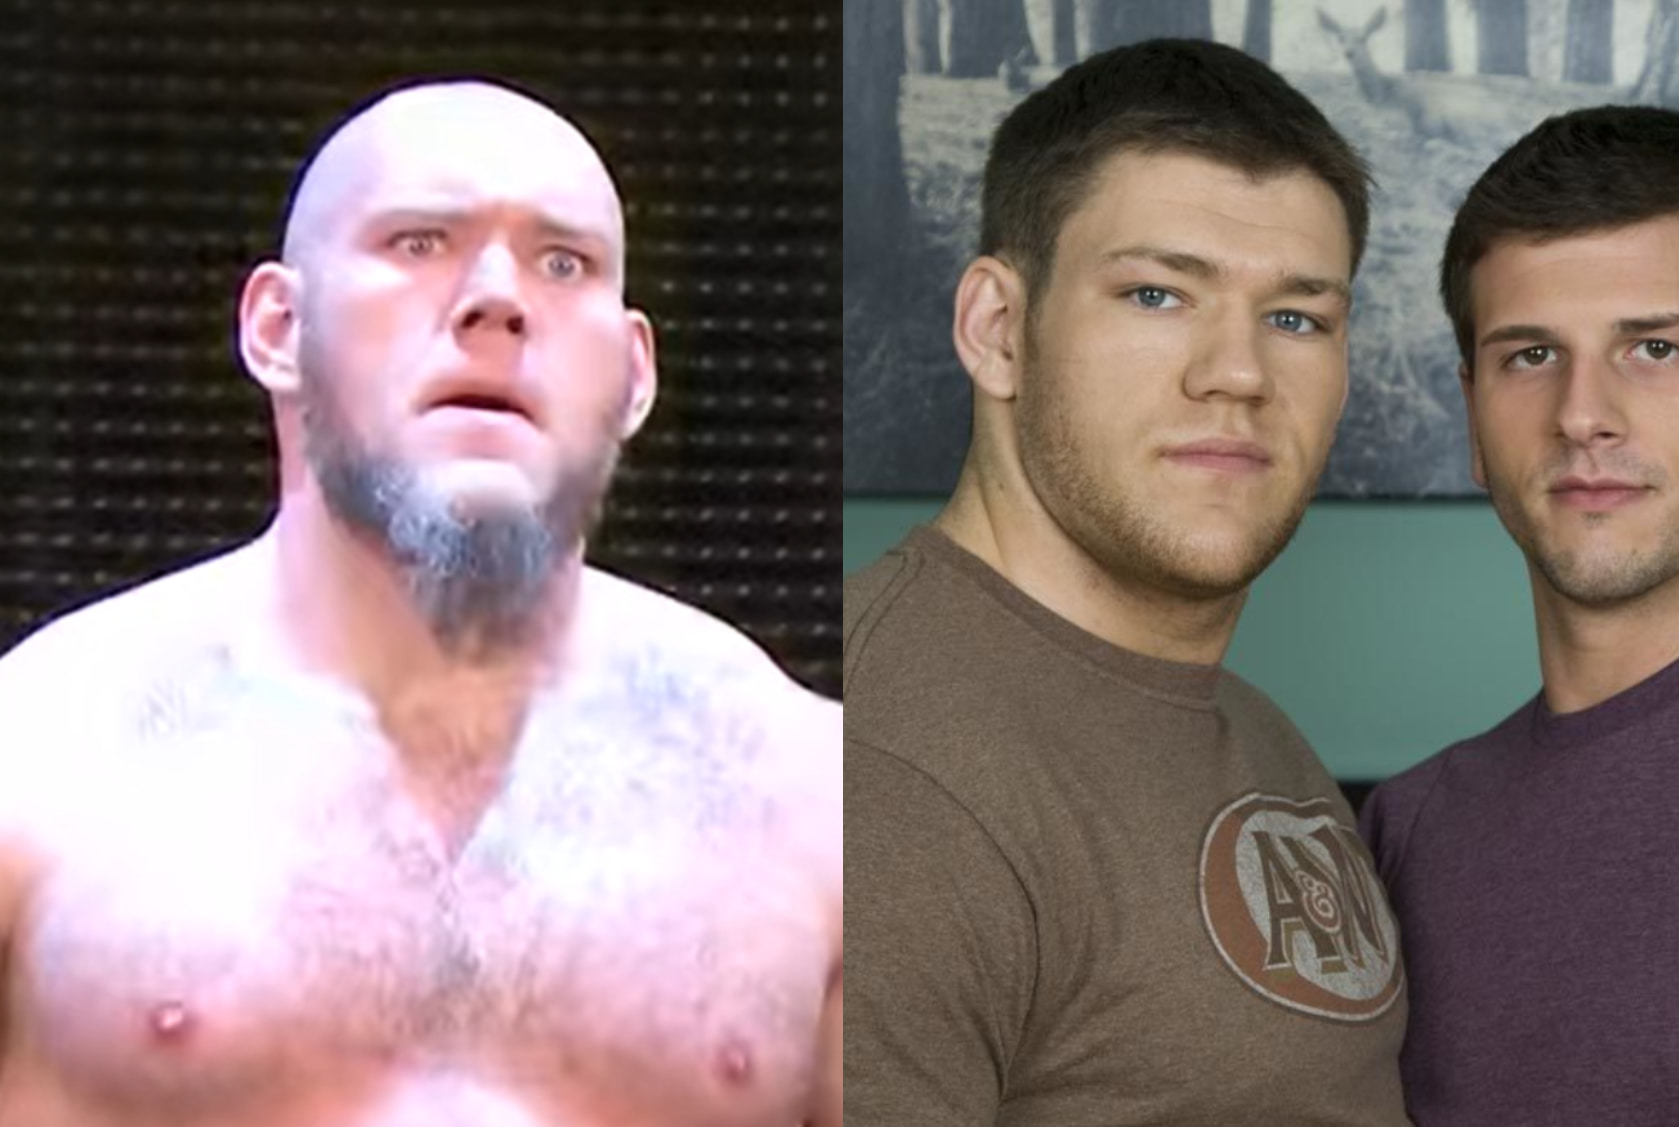 Wrestlers Who Have Done Porn - Homophobic WWE wrestler Lars Sullivan reportedly starred in gay adult films  - Metro Weekly